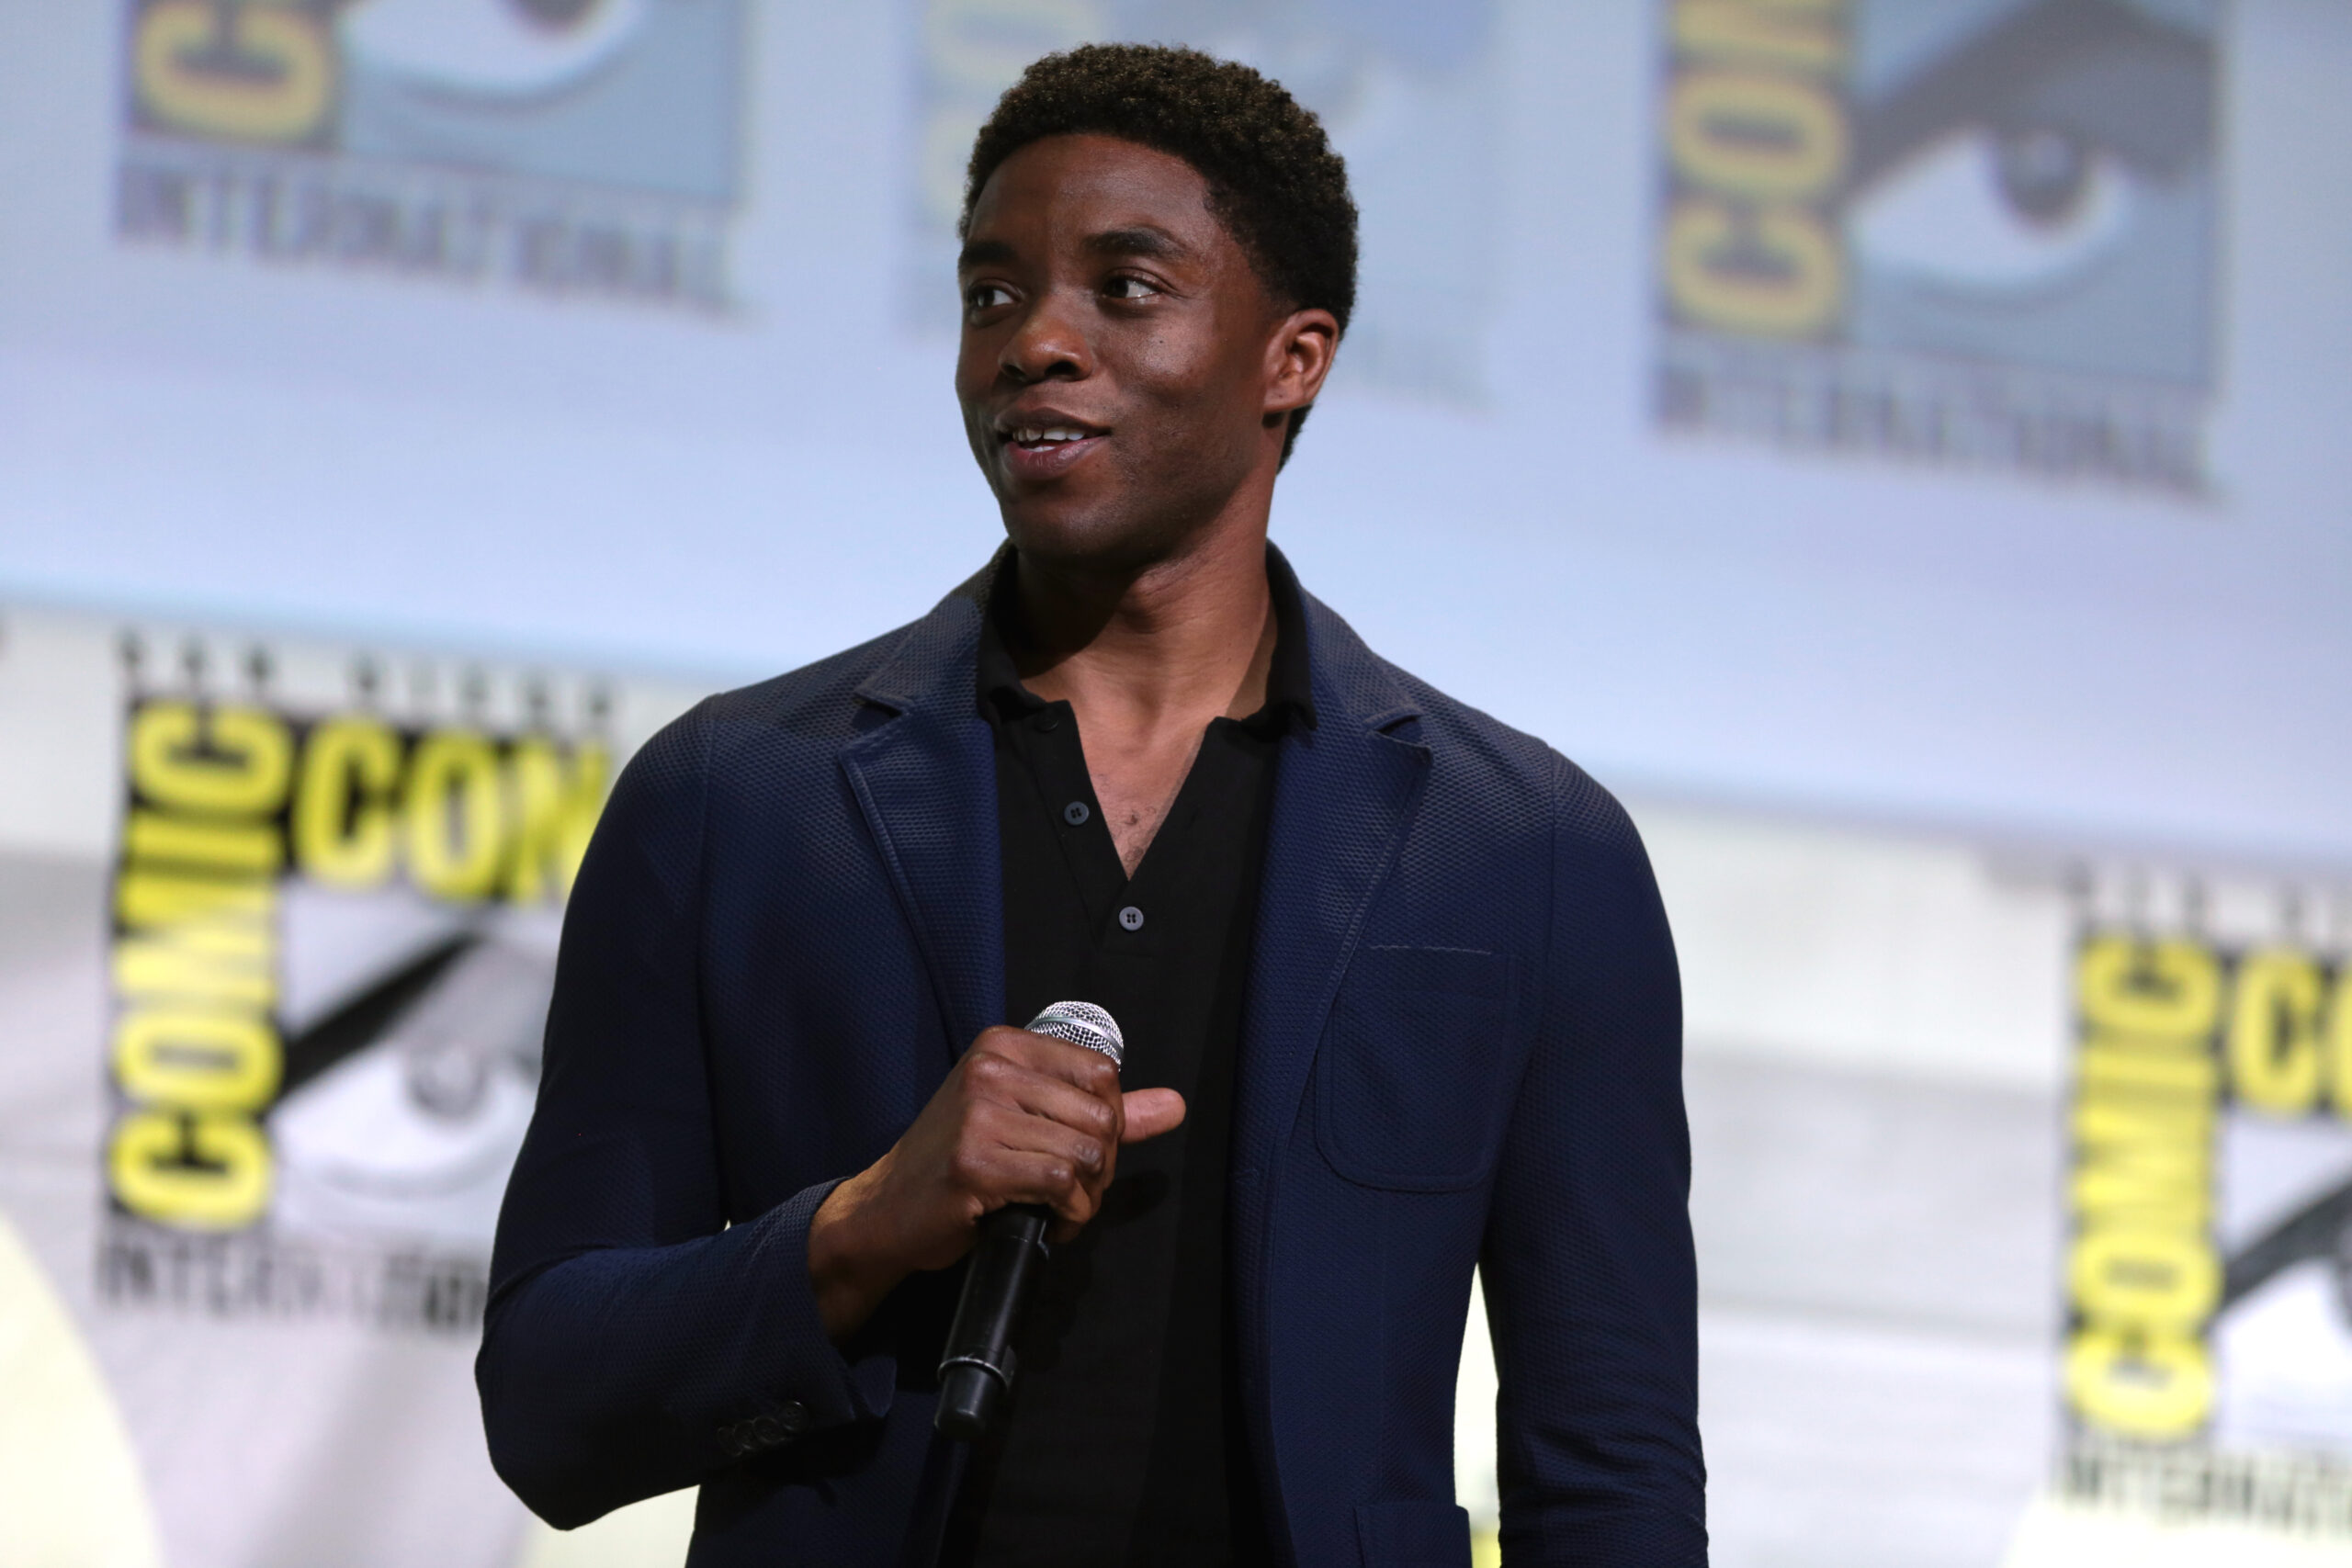 Fine Arts Petition to Honor Chadwick Boseman Gains Traction Both Online and Off